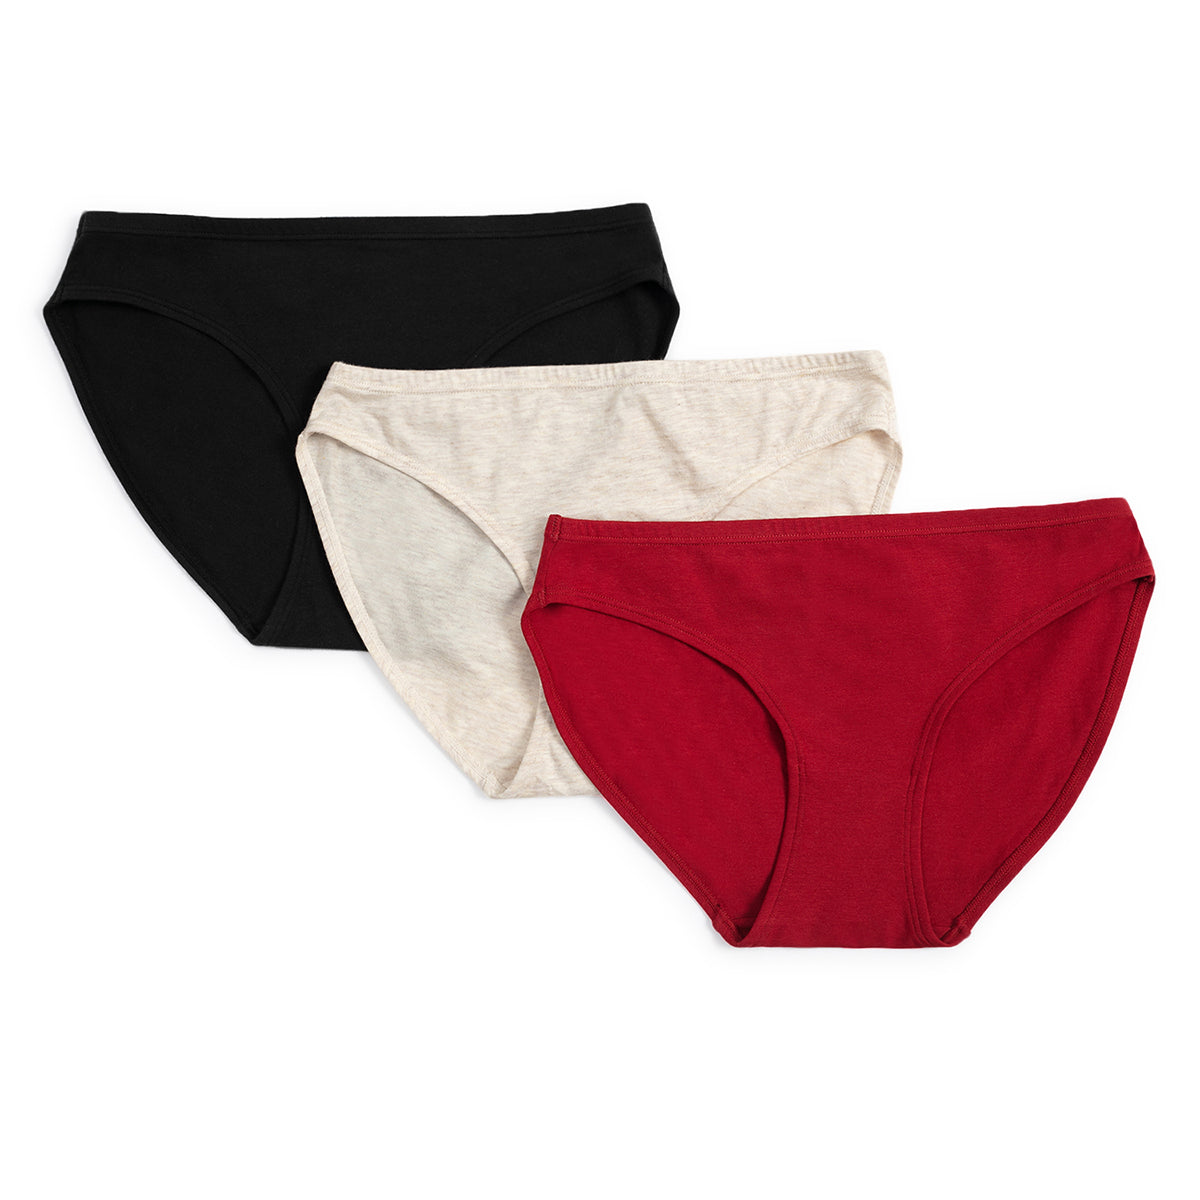 Pack Of 3 Low rise Bikini Cotton Stretch Full Rear Coverage Panty -NYP138-Multi colour